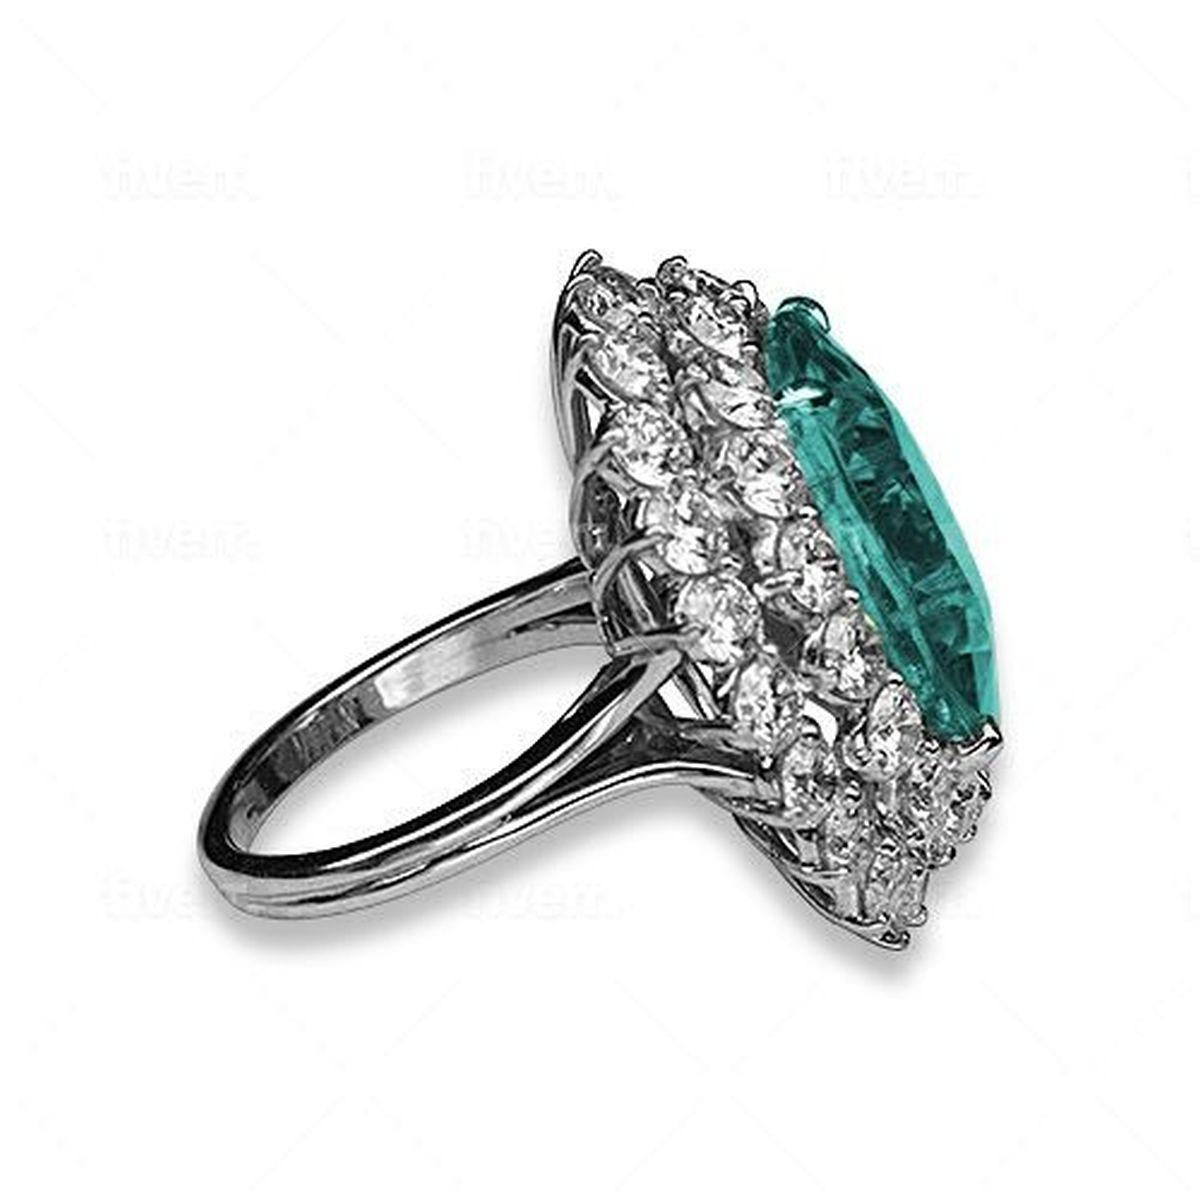 Simply Beautiful! Finely detailed Paraiba Tourmaline and Diamond Platinum Ring. Center securely nestled with an Oval Neon Blue/Green GIA Paraiba Tourmaline SI, weighing approx. 17.16 Carats surrounded by Diamonds, E/F, VS, weighing approx.6.21tcw.